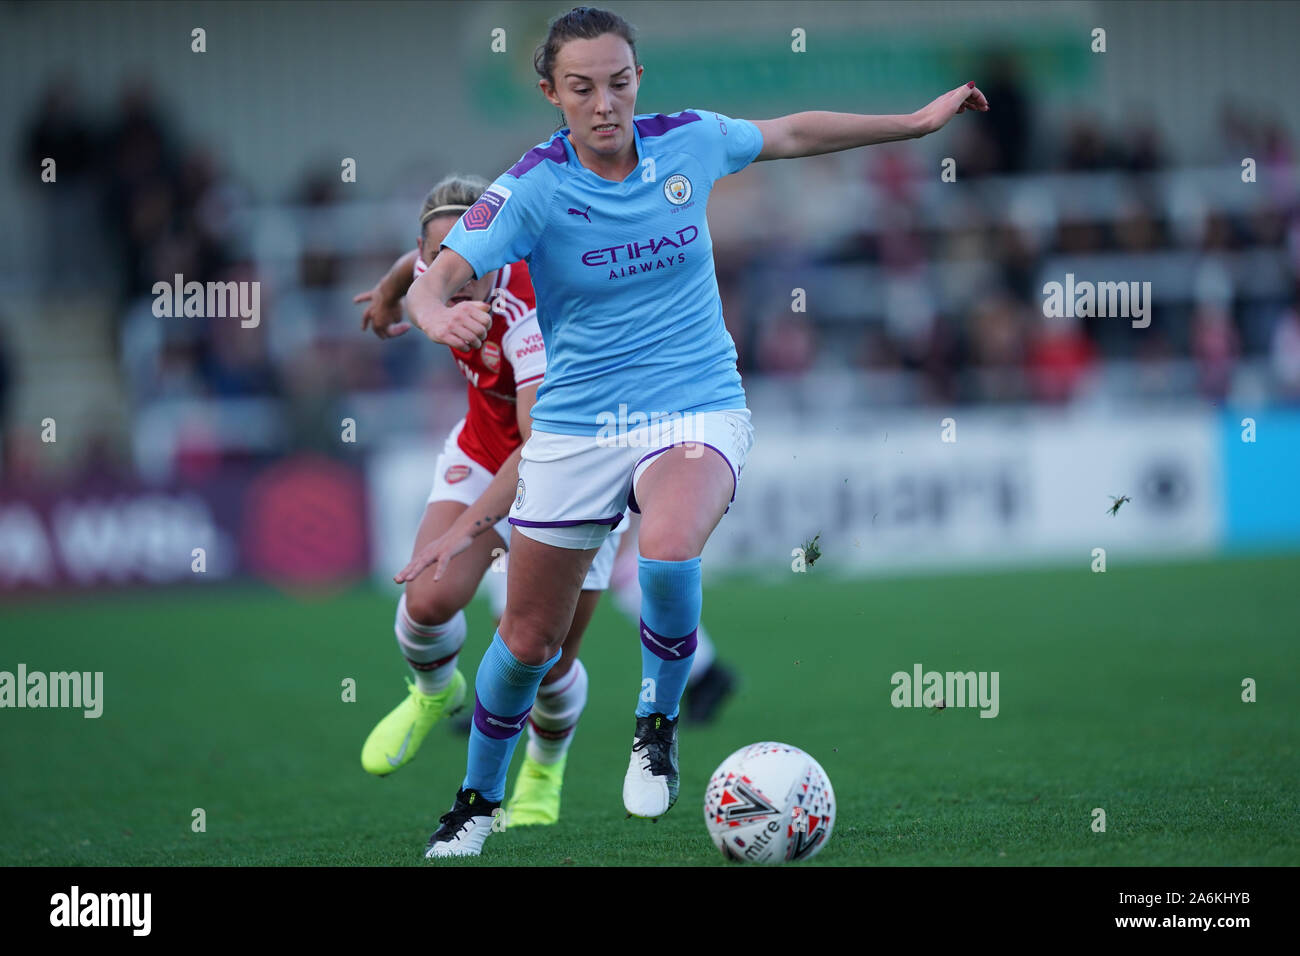 Borehamwood, UK. 27th Oct, 2019. Caroline Weir of Manchester City on the ball during the Barclay's FA WSL football match between Arsenal vs Manchester City at Meadow Park on October 27, 2019 in Borehamwood, England (Photo by Daniela Porcelli/SPP) Credit: SPP Sport Press Photo. /Alamy Live News Stock Photo